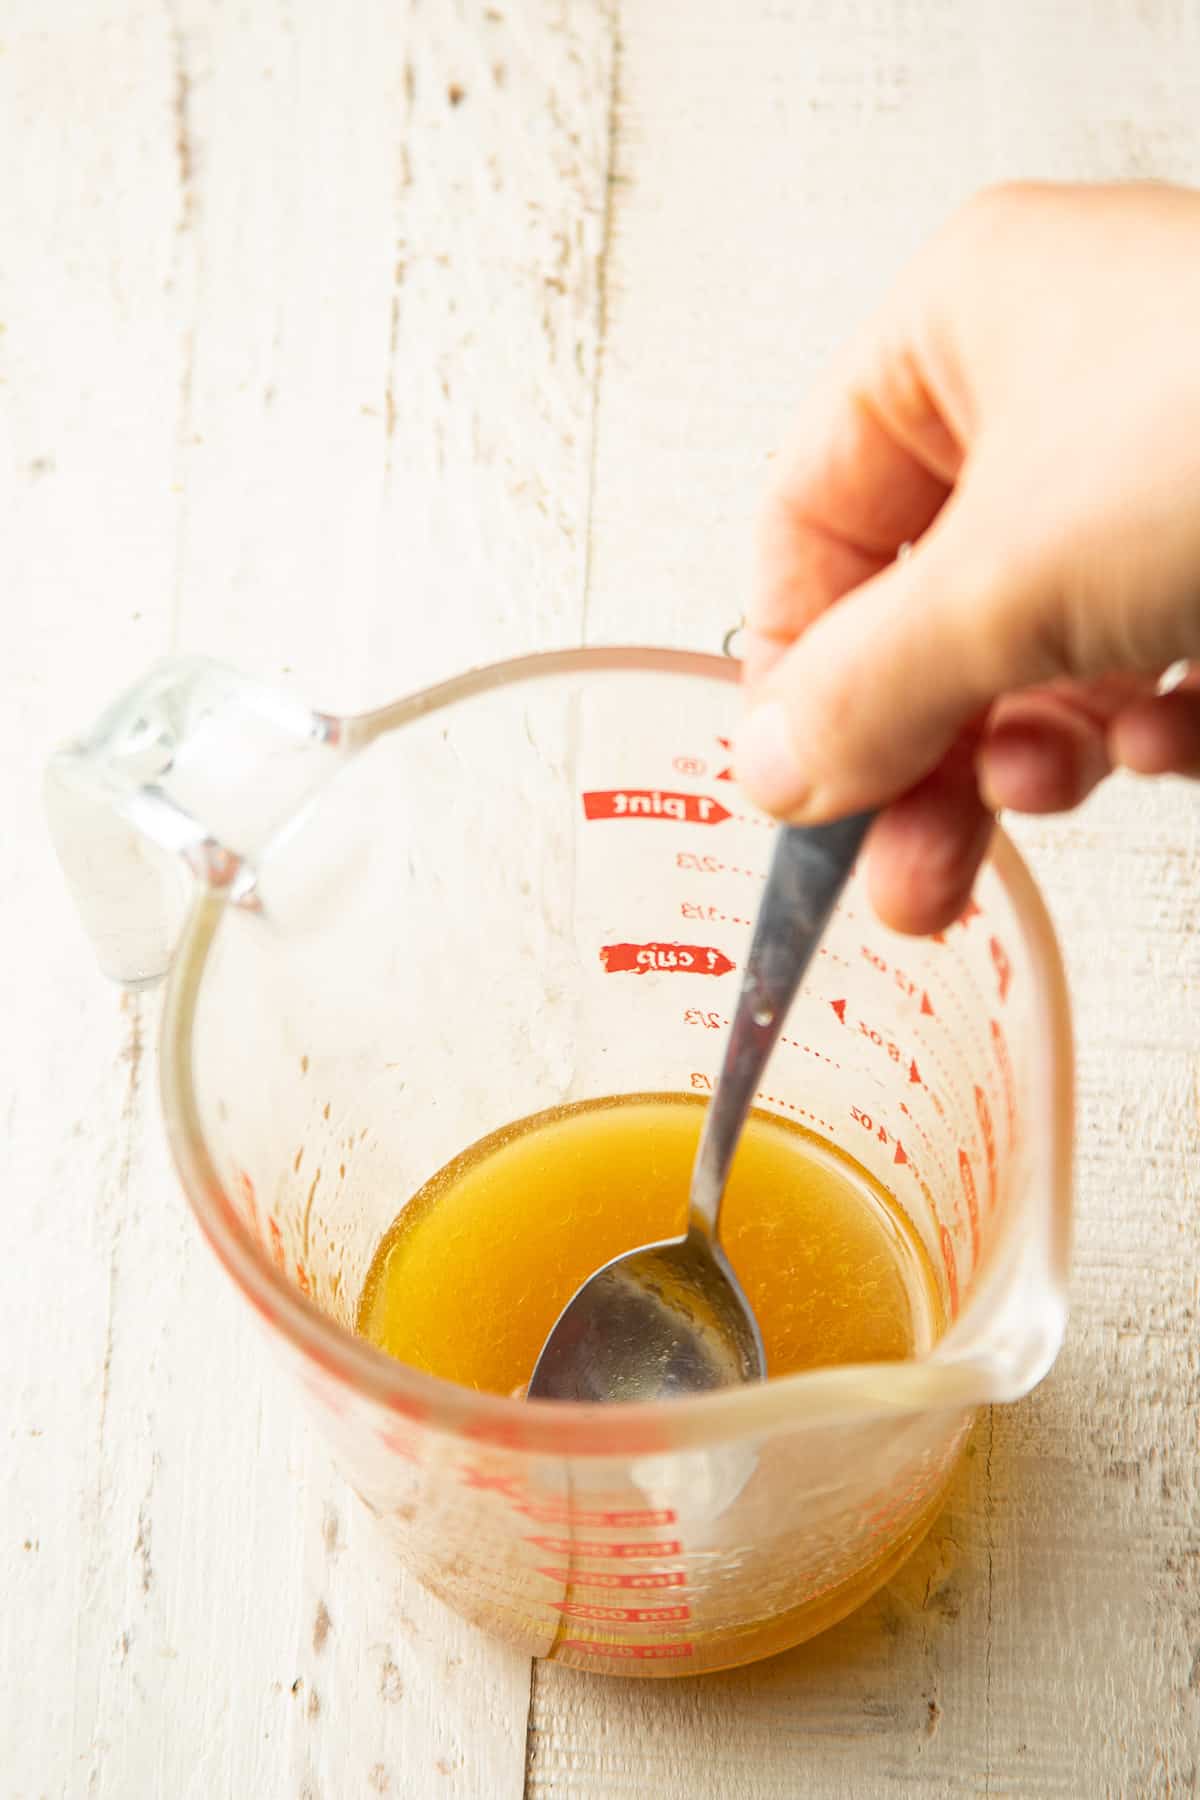 Hand stirring lime dressing ingredients together in a liquid measuring cup.